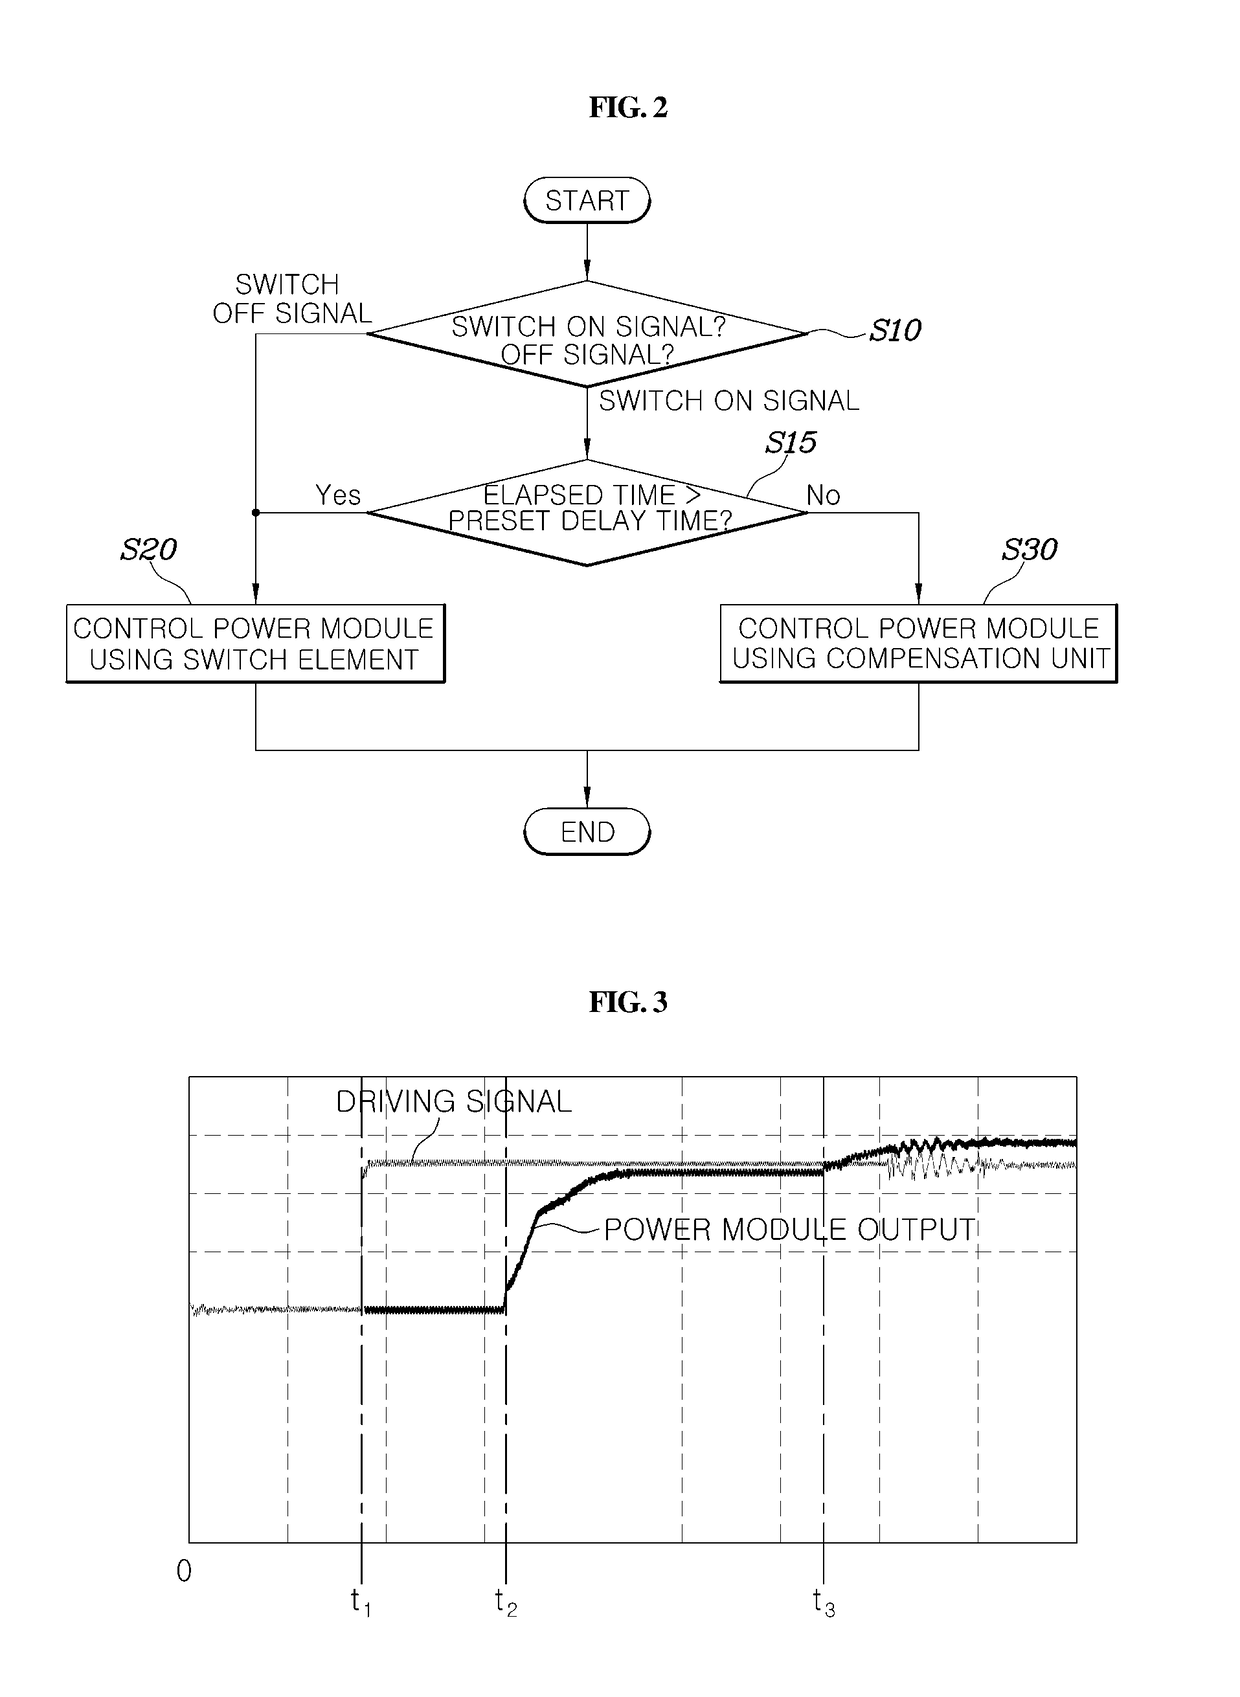 System and method for controlling power module